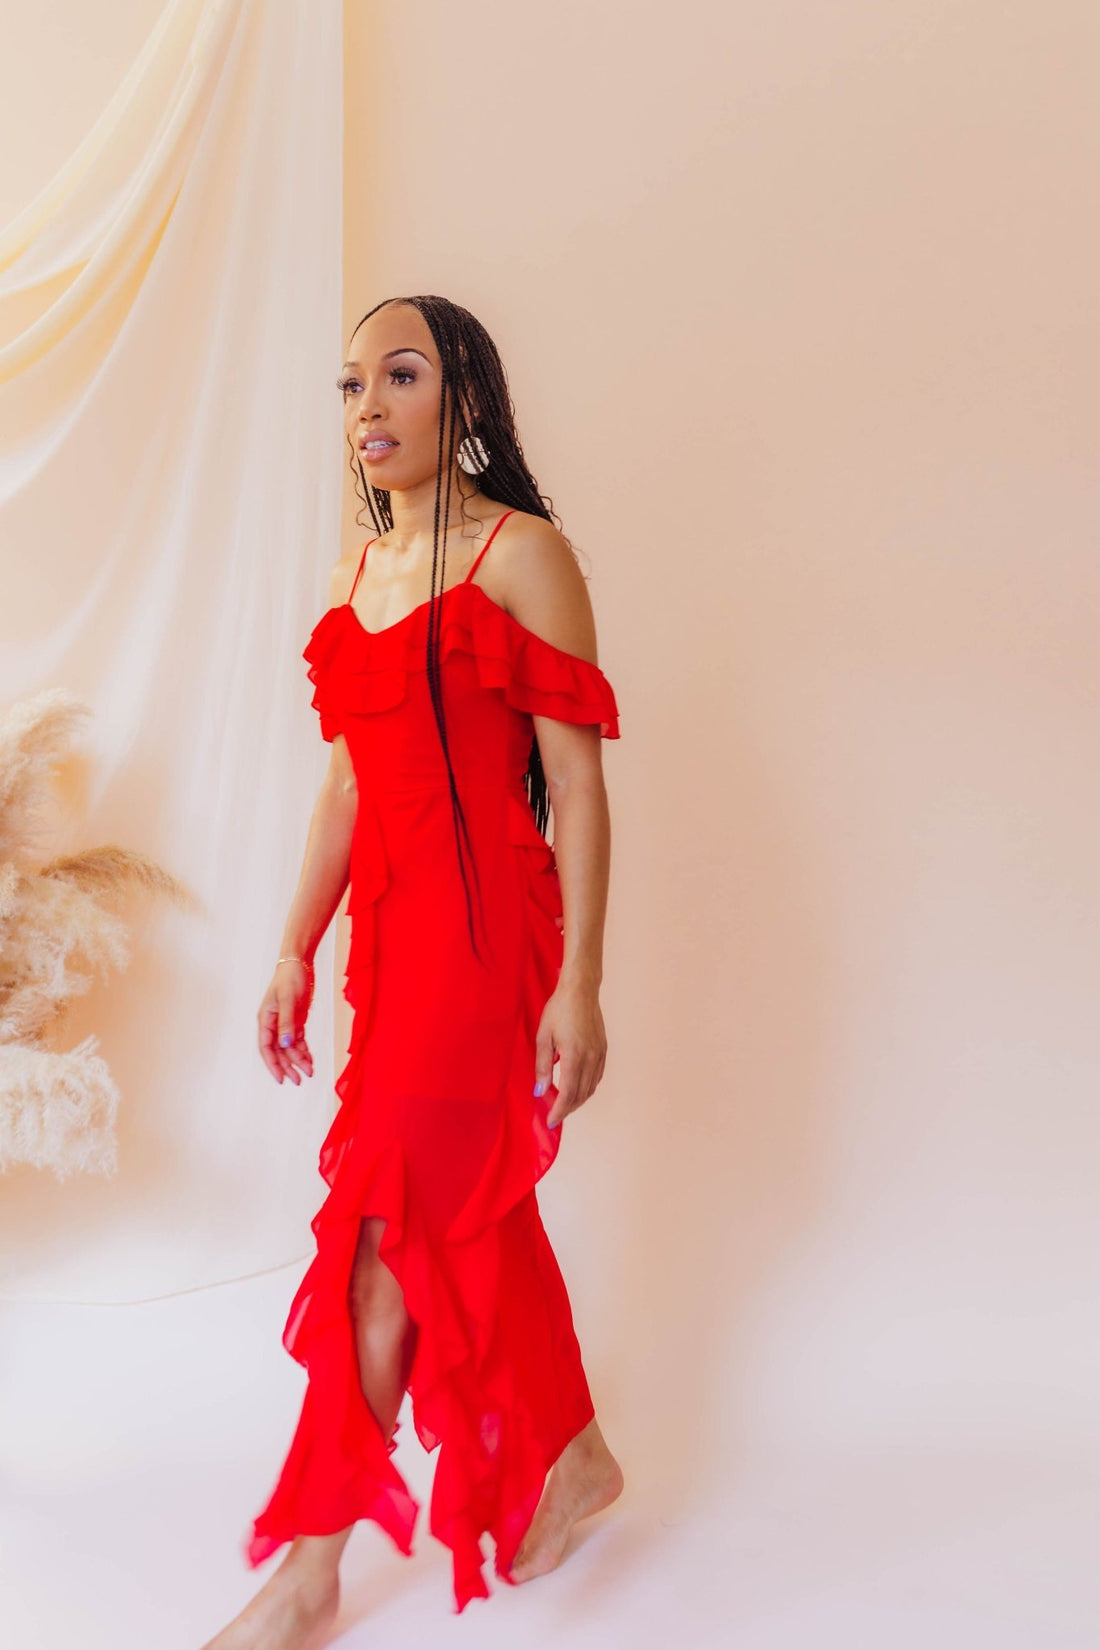 Woman-Owned Brand London’s Closet Boutique Aims to Change Fashion One Dress at a Time - London's Closet Boutique